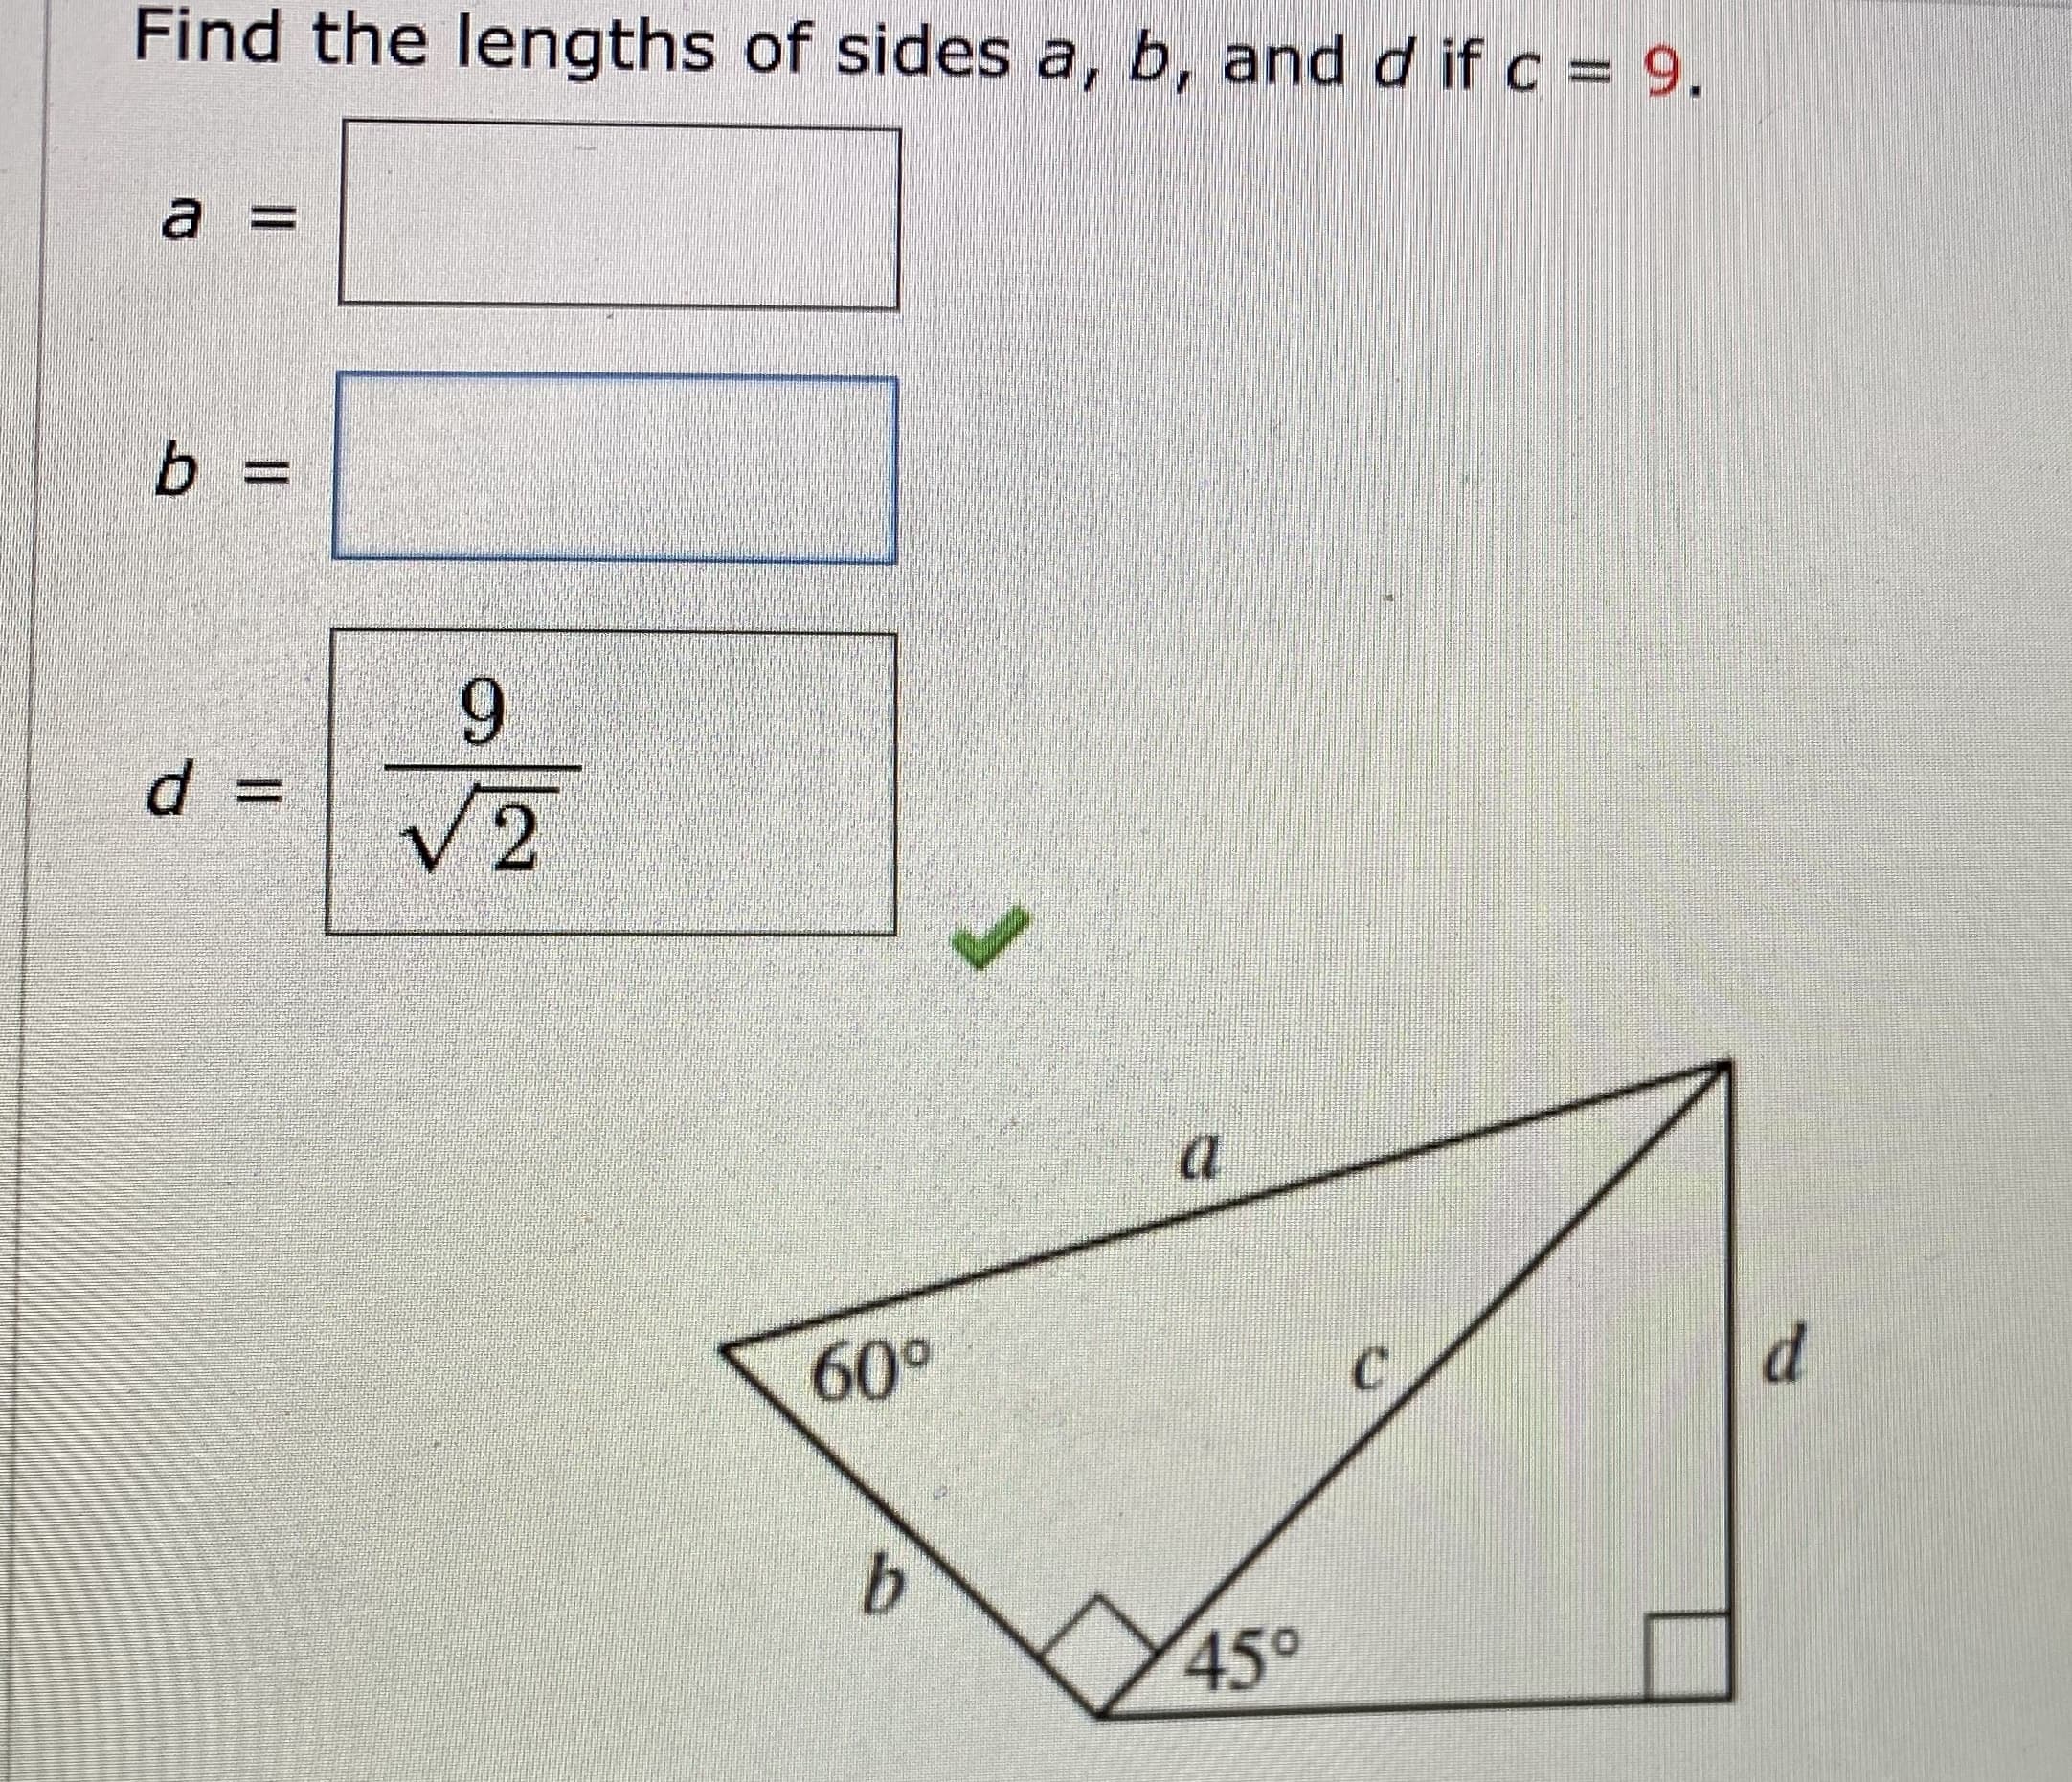 Find the lengths of sides a, b, and d if c = 9,
